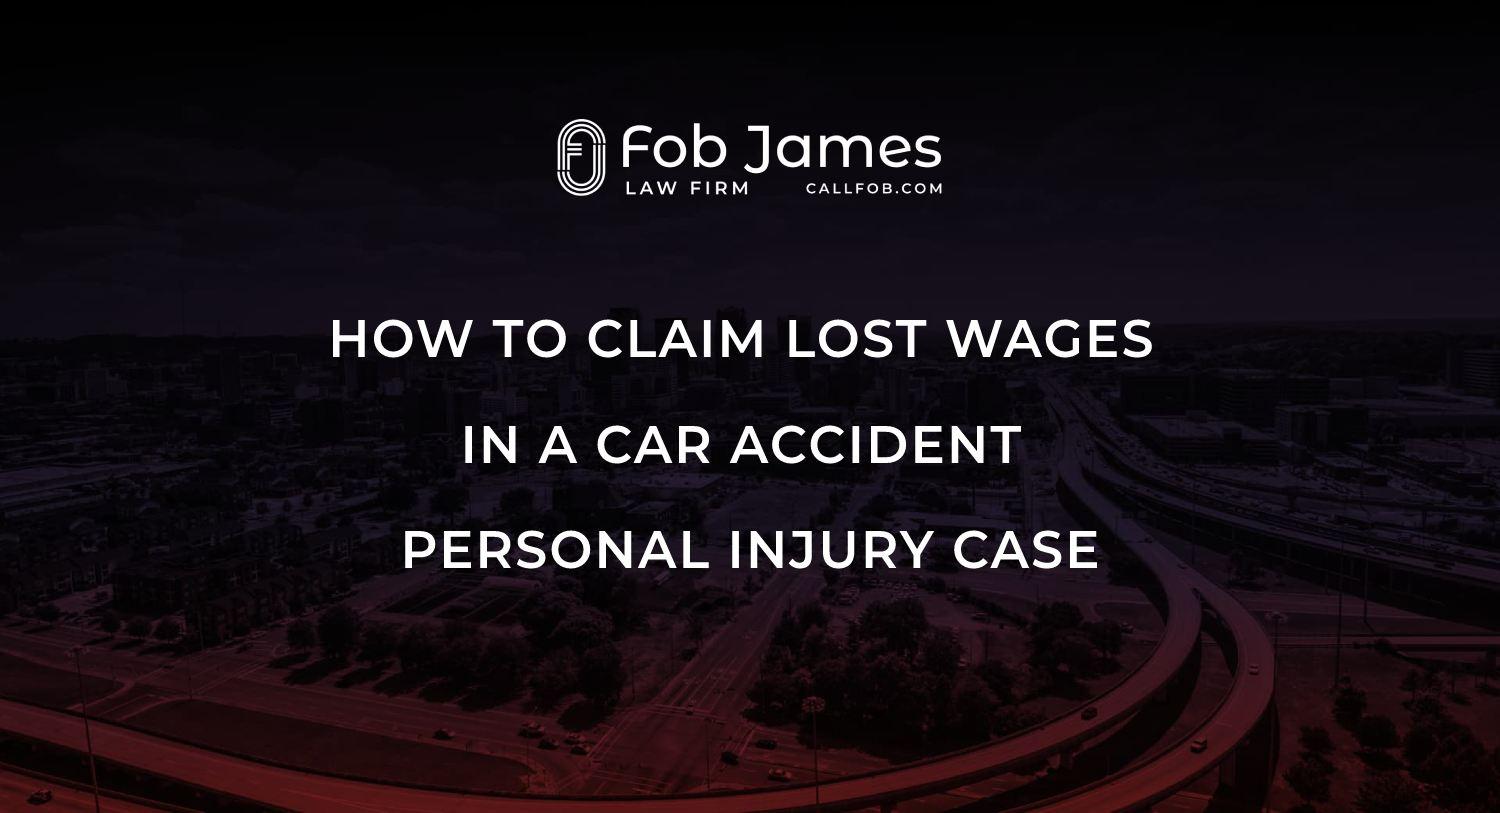 how-to-claim-lost-wages-in-a-car-accident-personal-injury-case-fob